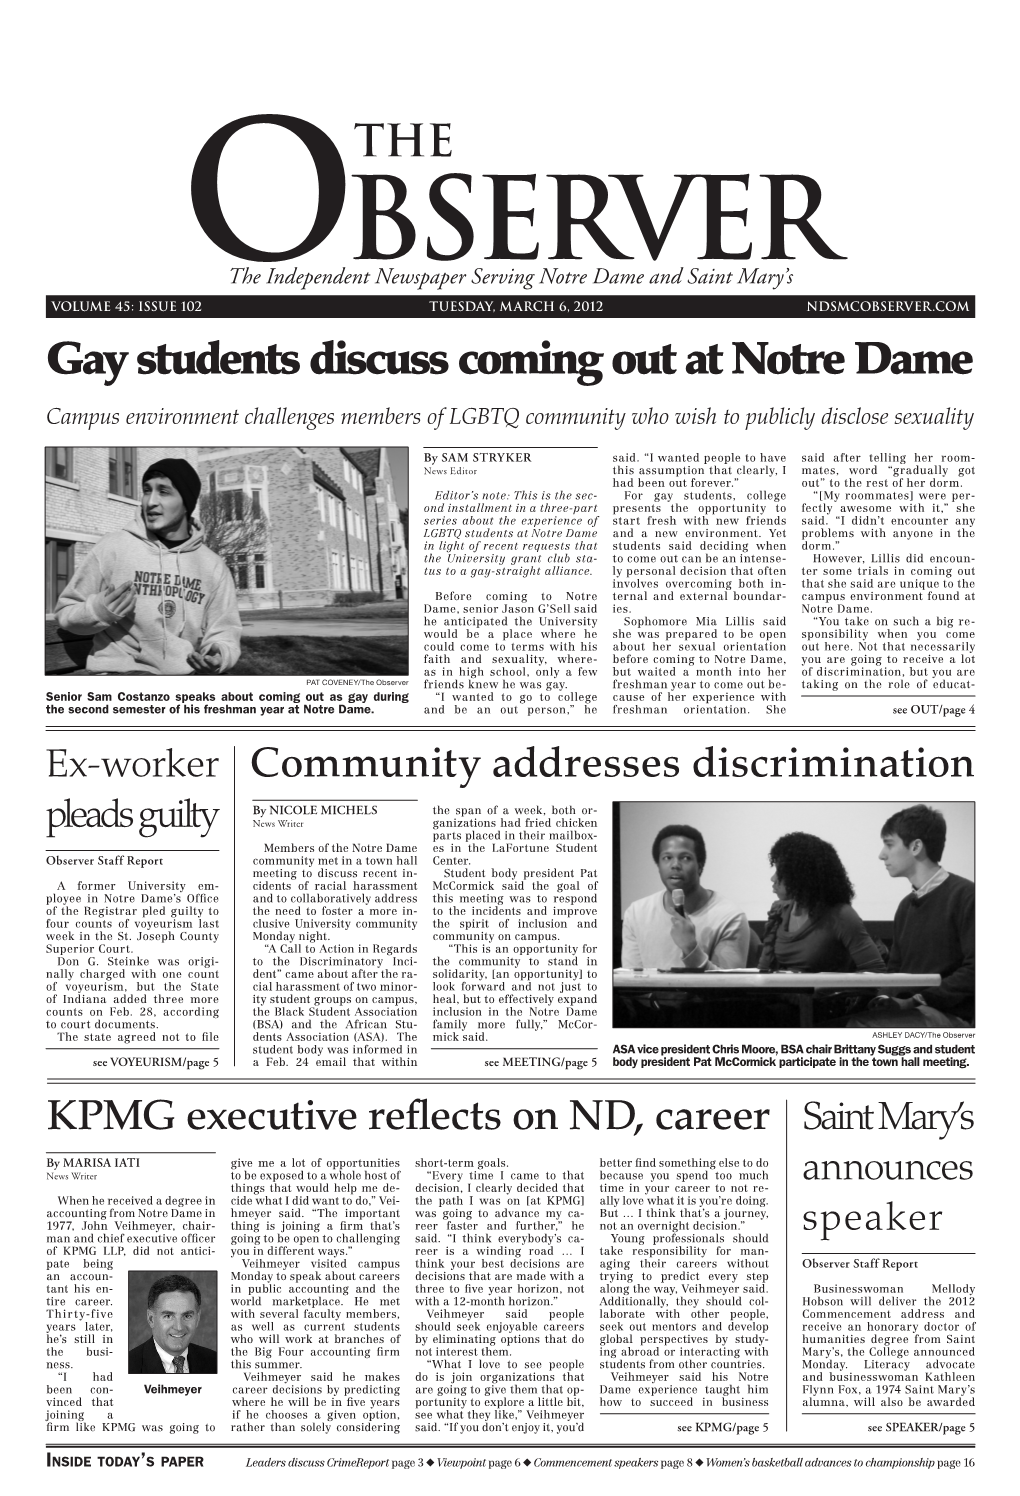 Gay Students Discuss Coming out at Notre Dame Campus Environment Challenges Members of LGBTQ Community Who Wish to Publicly Disclose Sexuality